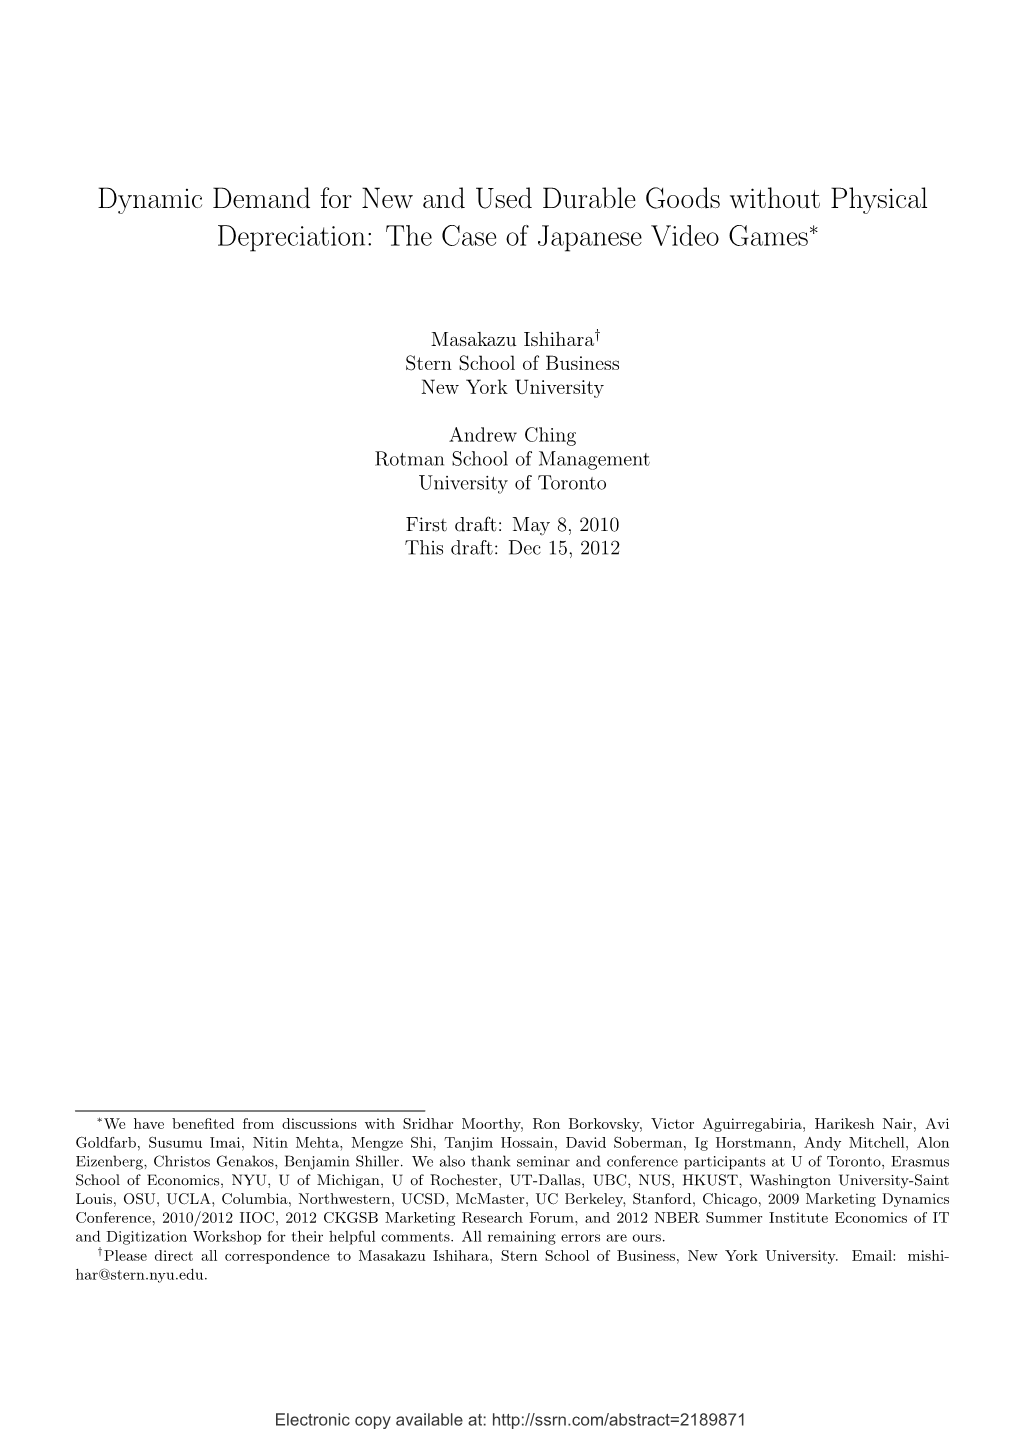 Dynamic Demand for New and Used Durable Goods Without Physical Depreciation: the Case of Japanese Video Games∗